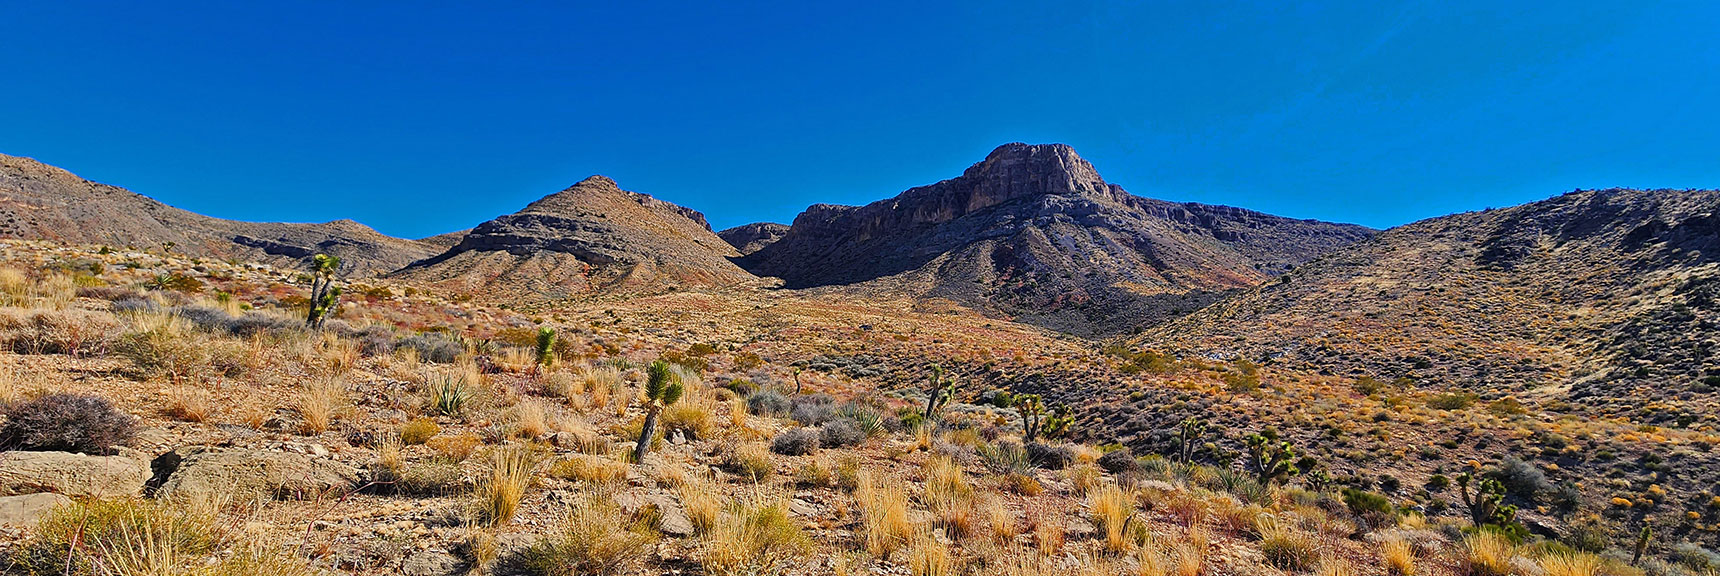 View into Second Canyon from North. Best Summit Approaches Will in Shallow Canyon to the Right. | Landmark Bluff Circuit | Lovell Canyon, Nevada